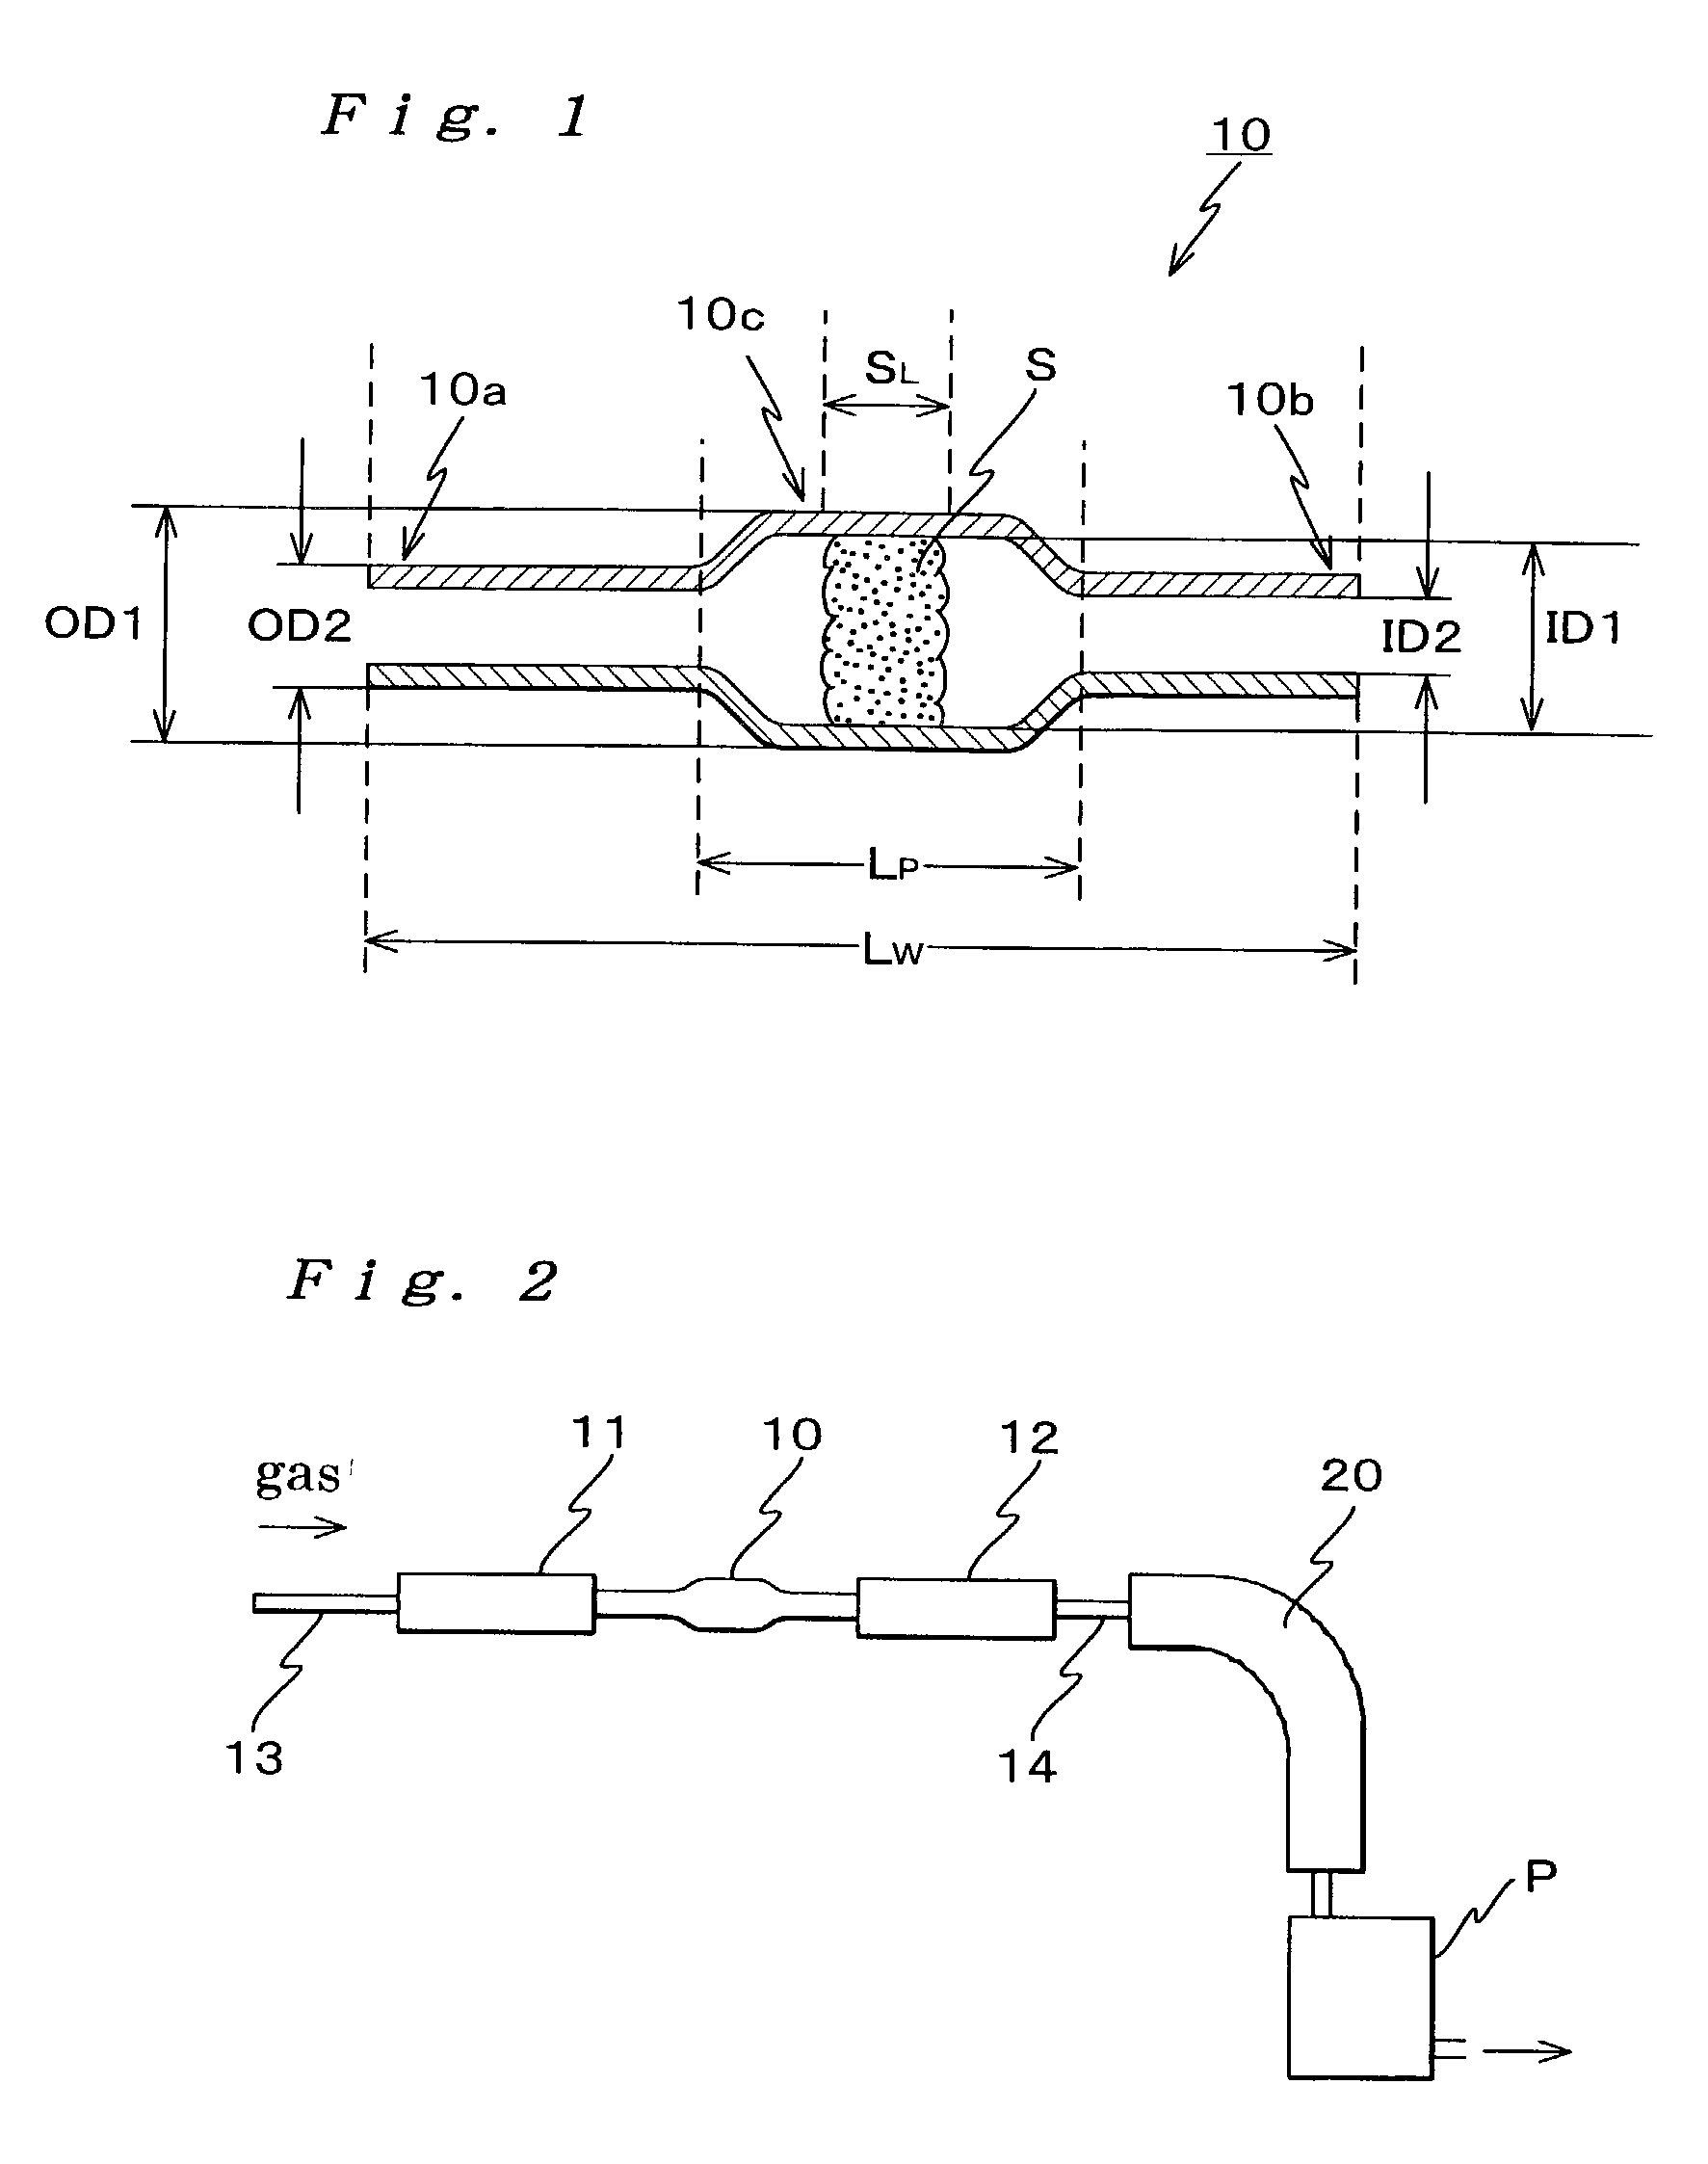 Method for determining amounts of suspended particulate matter, a sampling tube for determining the suspended particulate matter, and a sampling kit for determining the suspended particulate matter